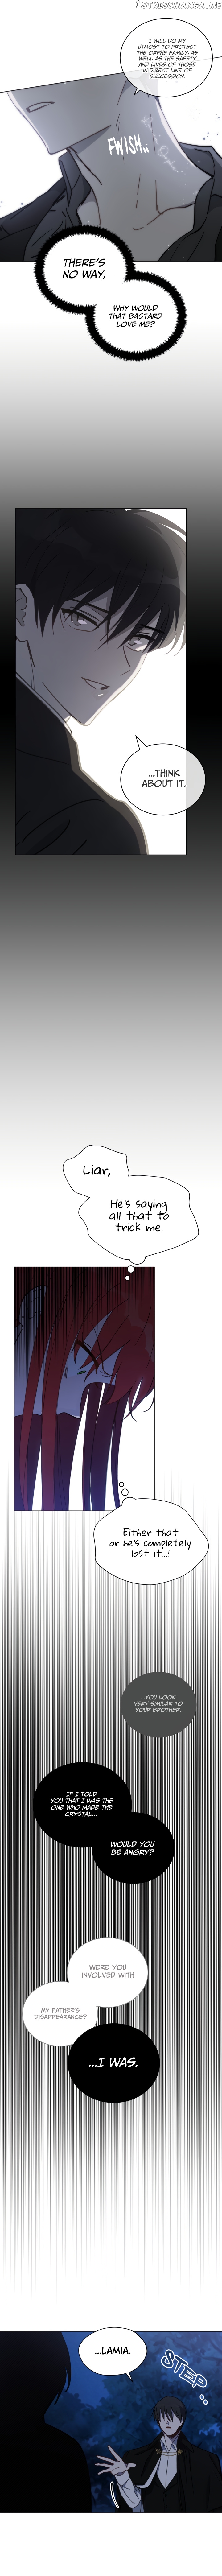 Lamia Orphe is Dead chapter 37 - page 7